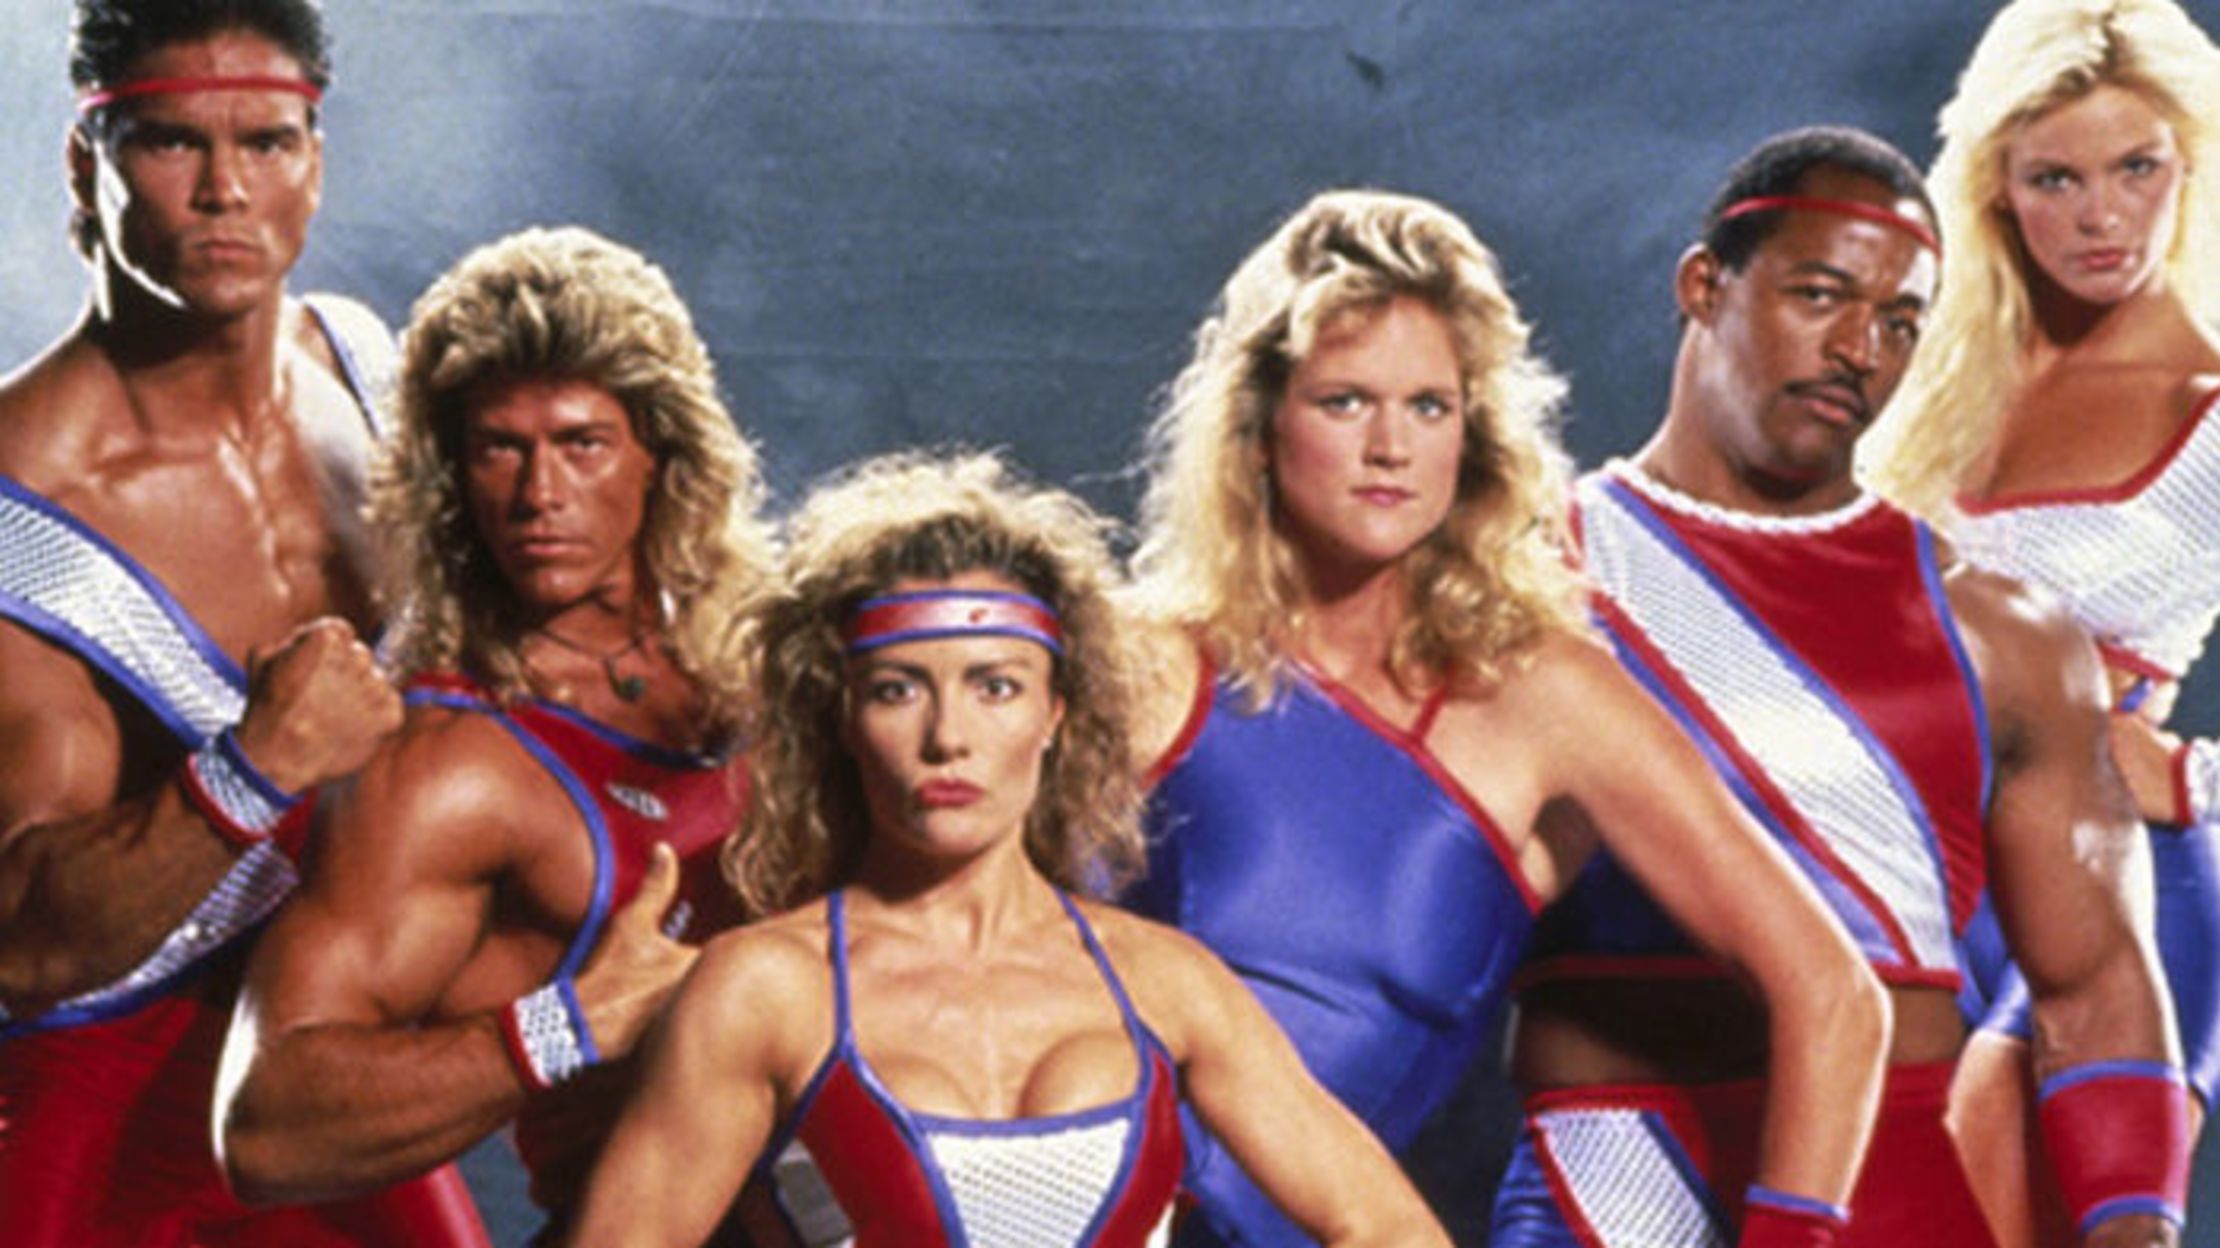 If you know, you know. original american gladiators. 